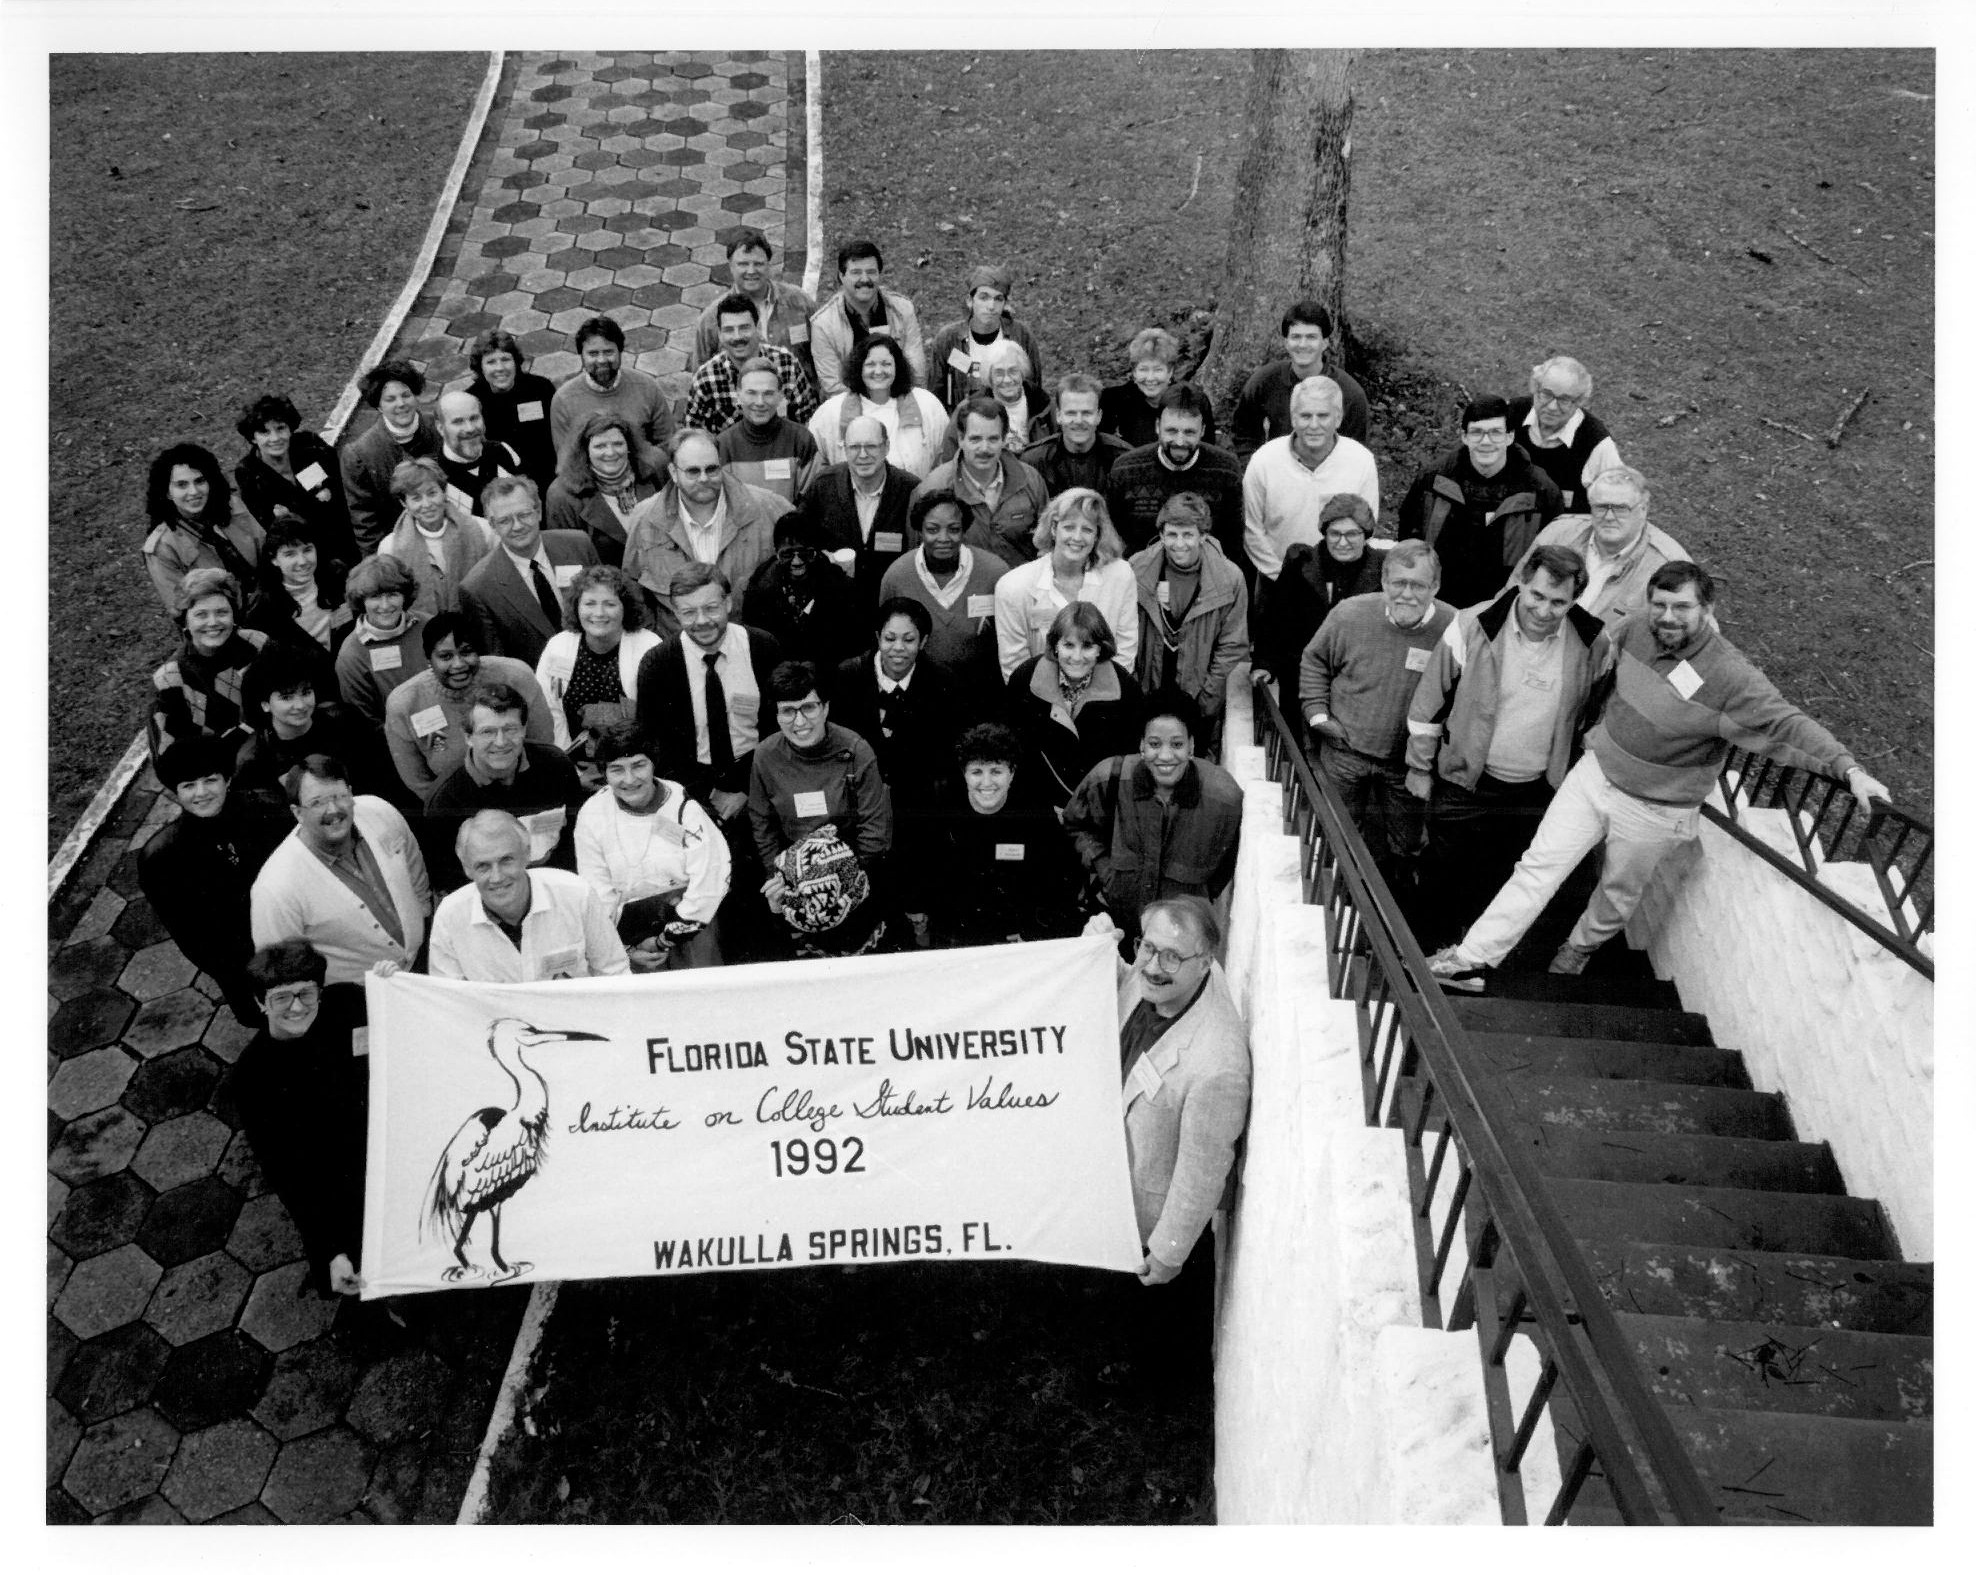 Participants at the 2nd annual Institute on College Student Values in 1992 (the Institute was re-named in honor of its founder in 2010).